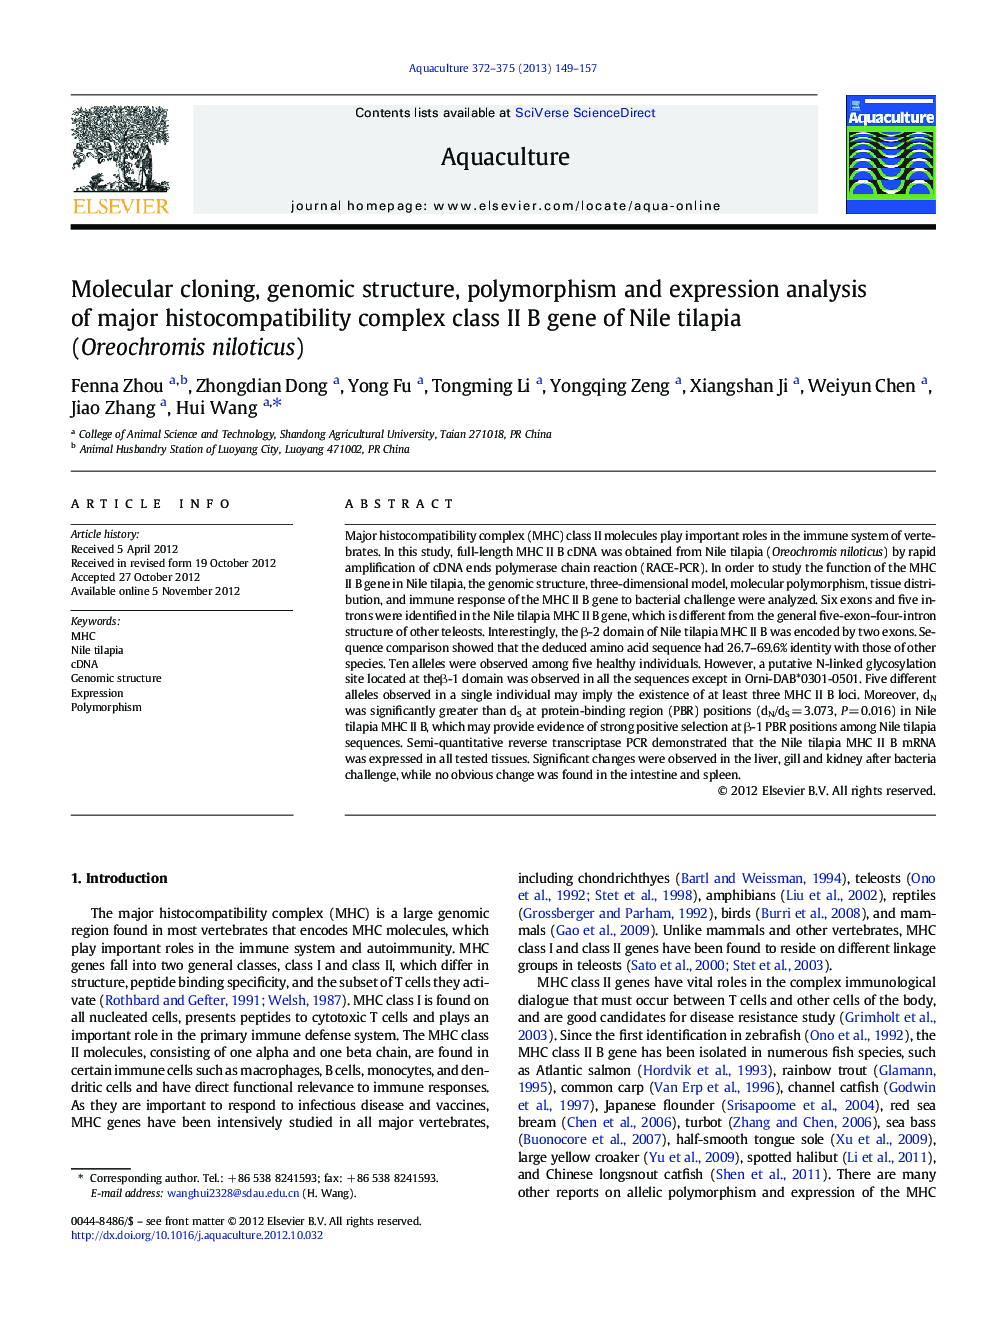 Molecular cloning, genomic structure, polymorphism and expression analysis of major histocompatibility complex class II B gene of Nile tilapia (Oreochromis niloticus)